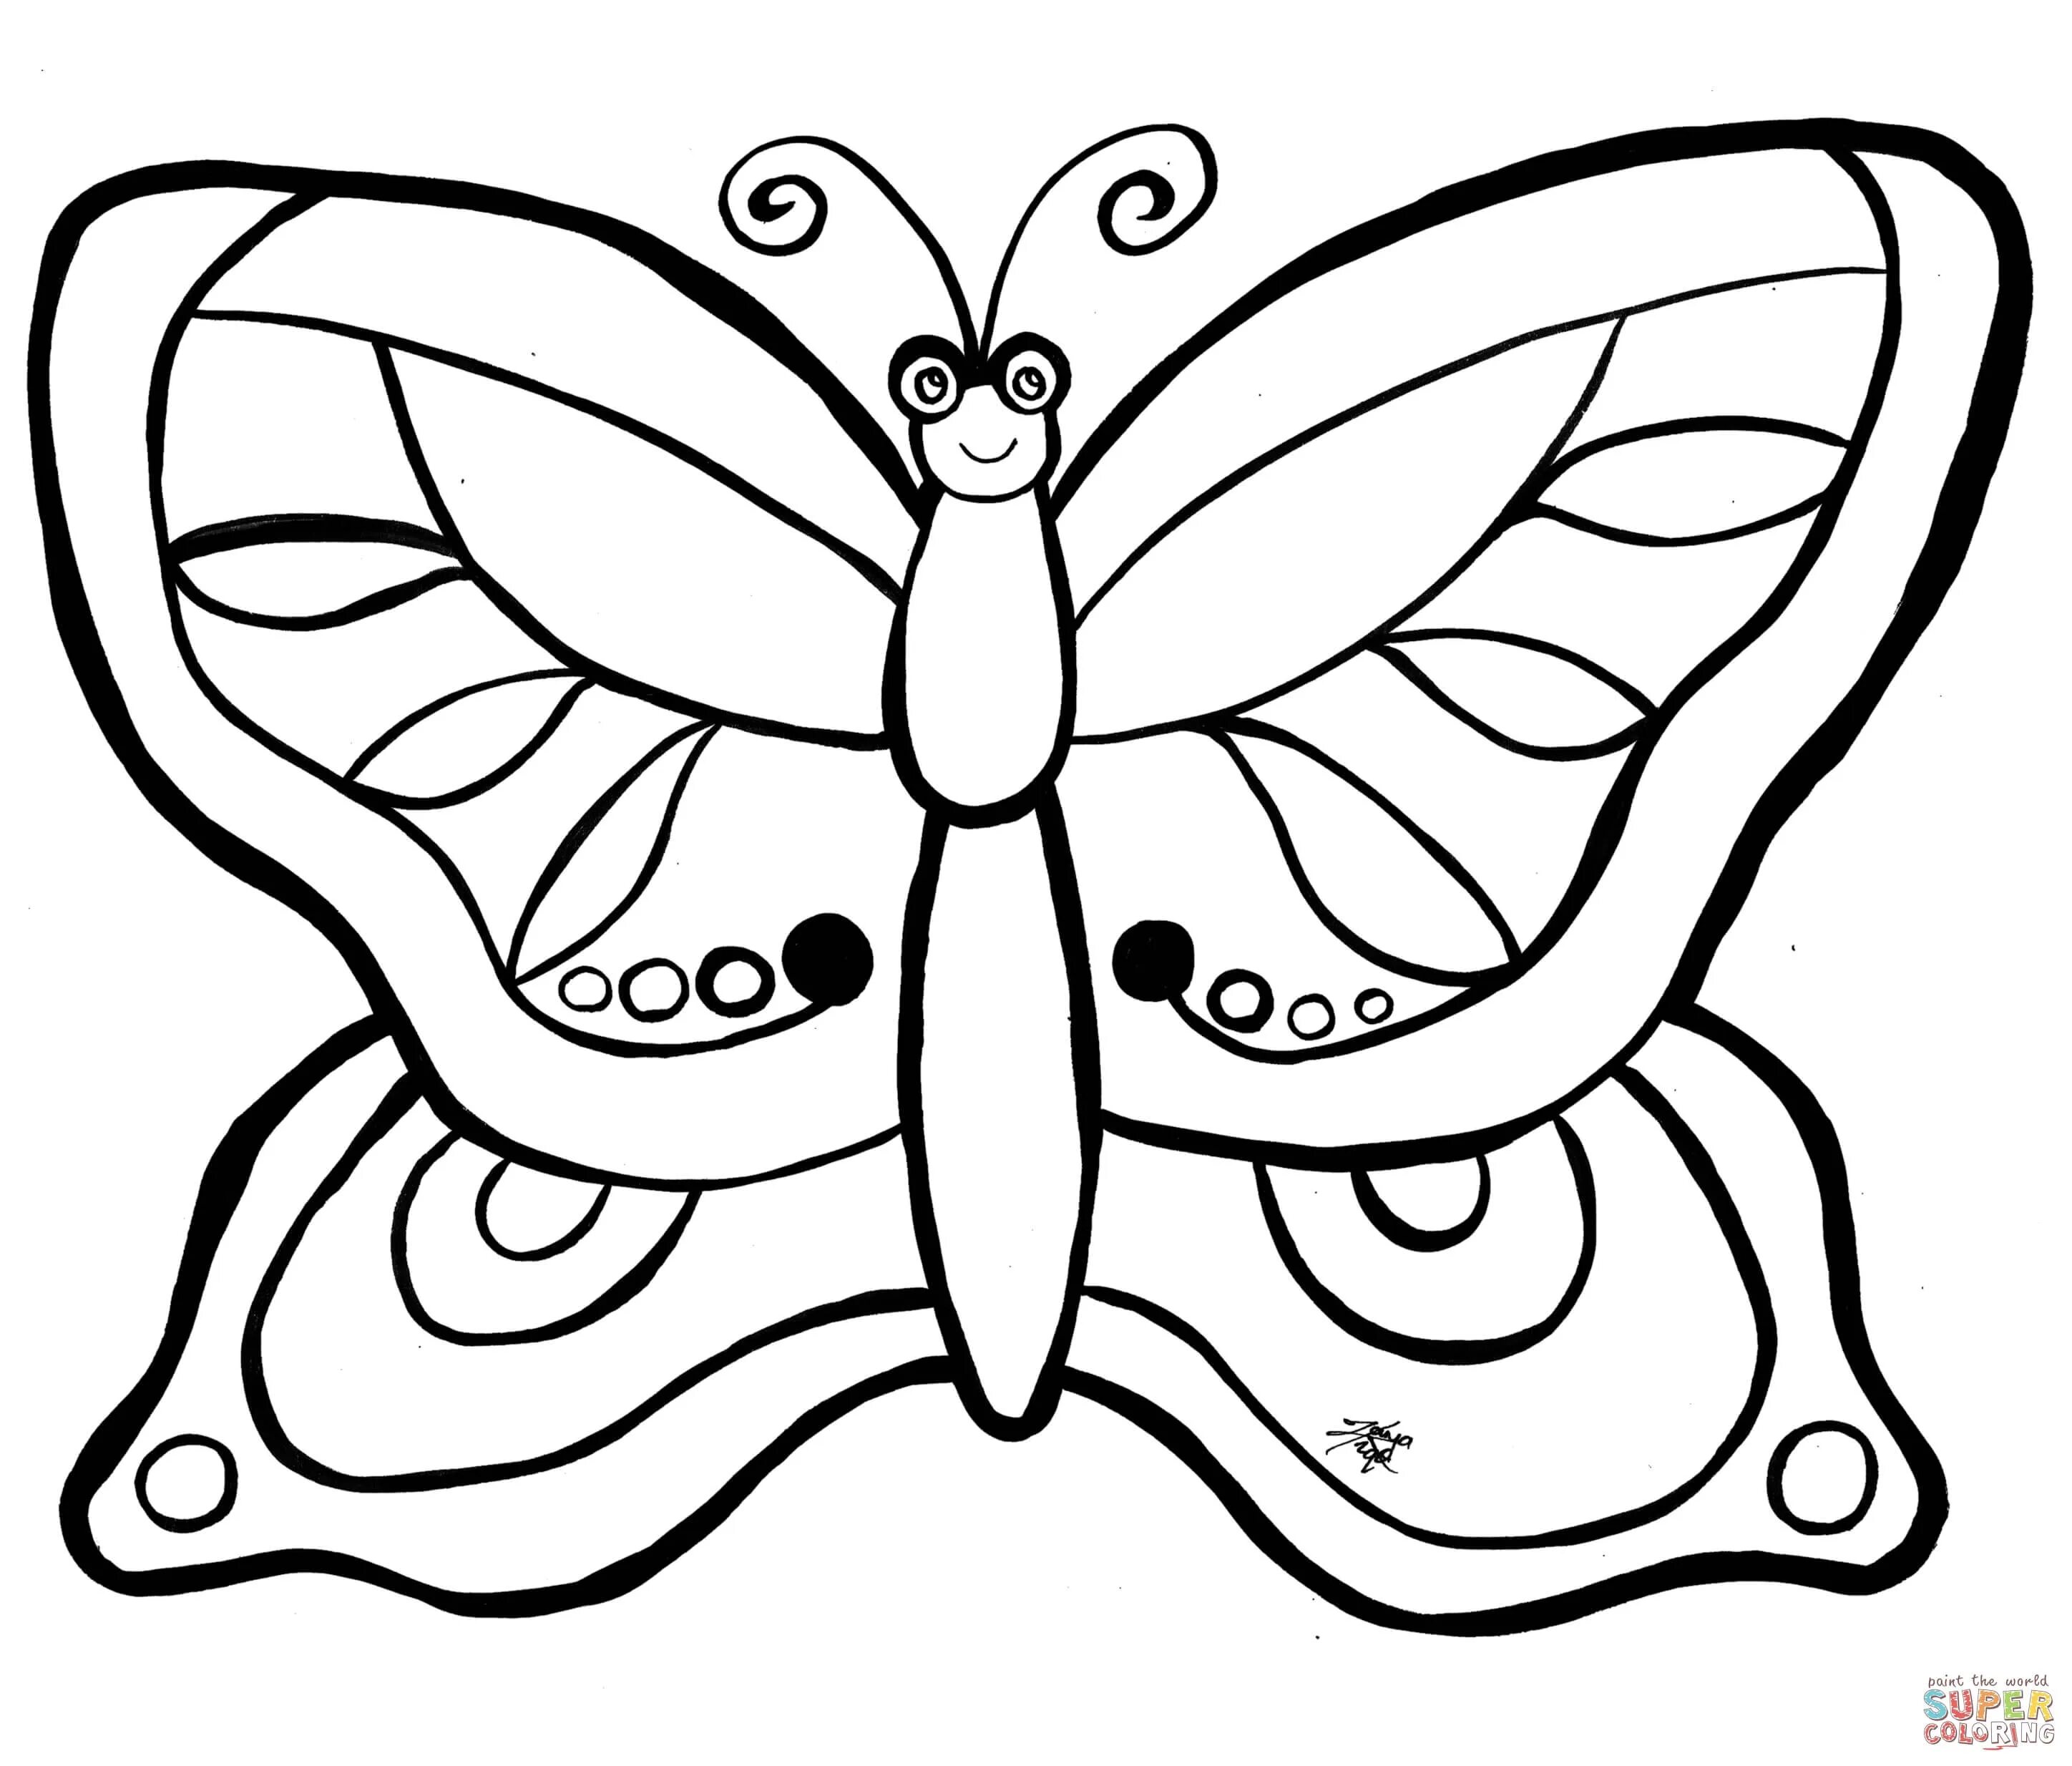 A fun colored butterfly coloring book